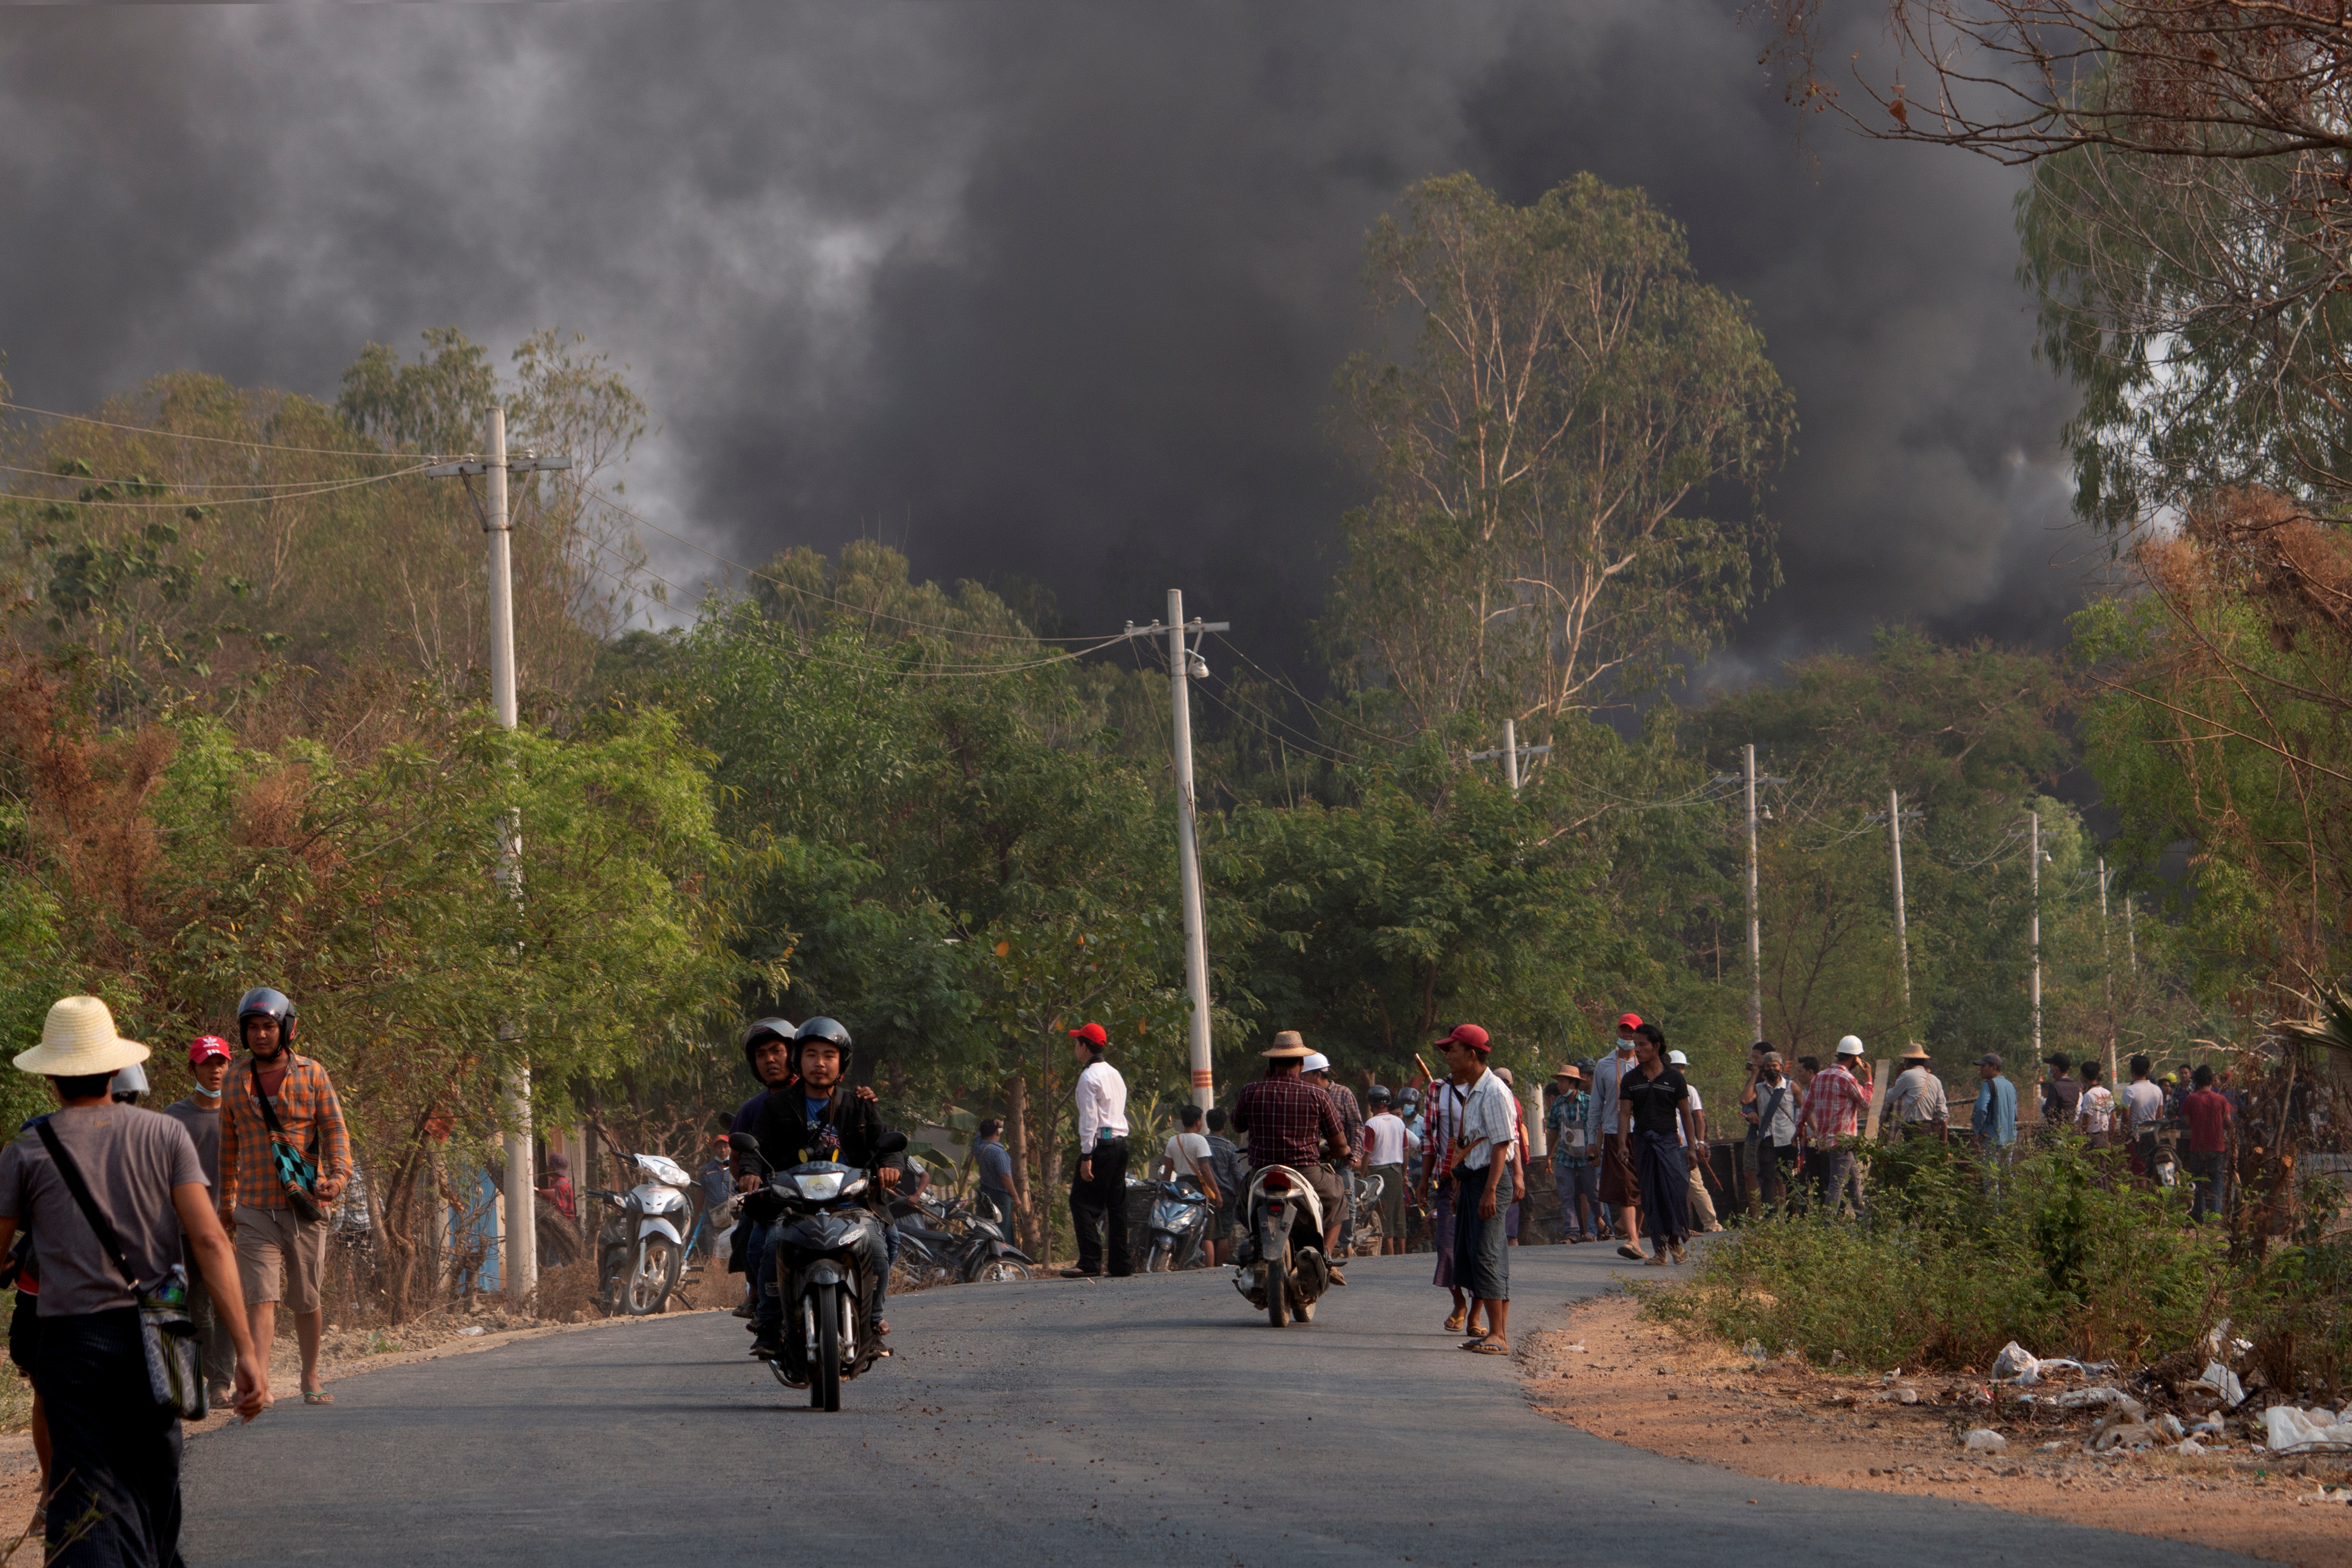 Demonstrators are seen before a clash with security forces in Taze, Sagaing Region, Myanmar April 7, 2021, in this image obtained by Reuters. Photo obtained by REUTERS. 